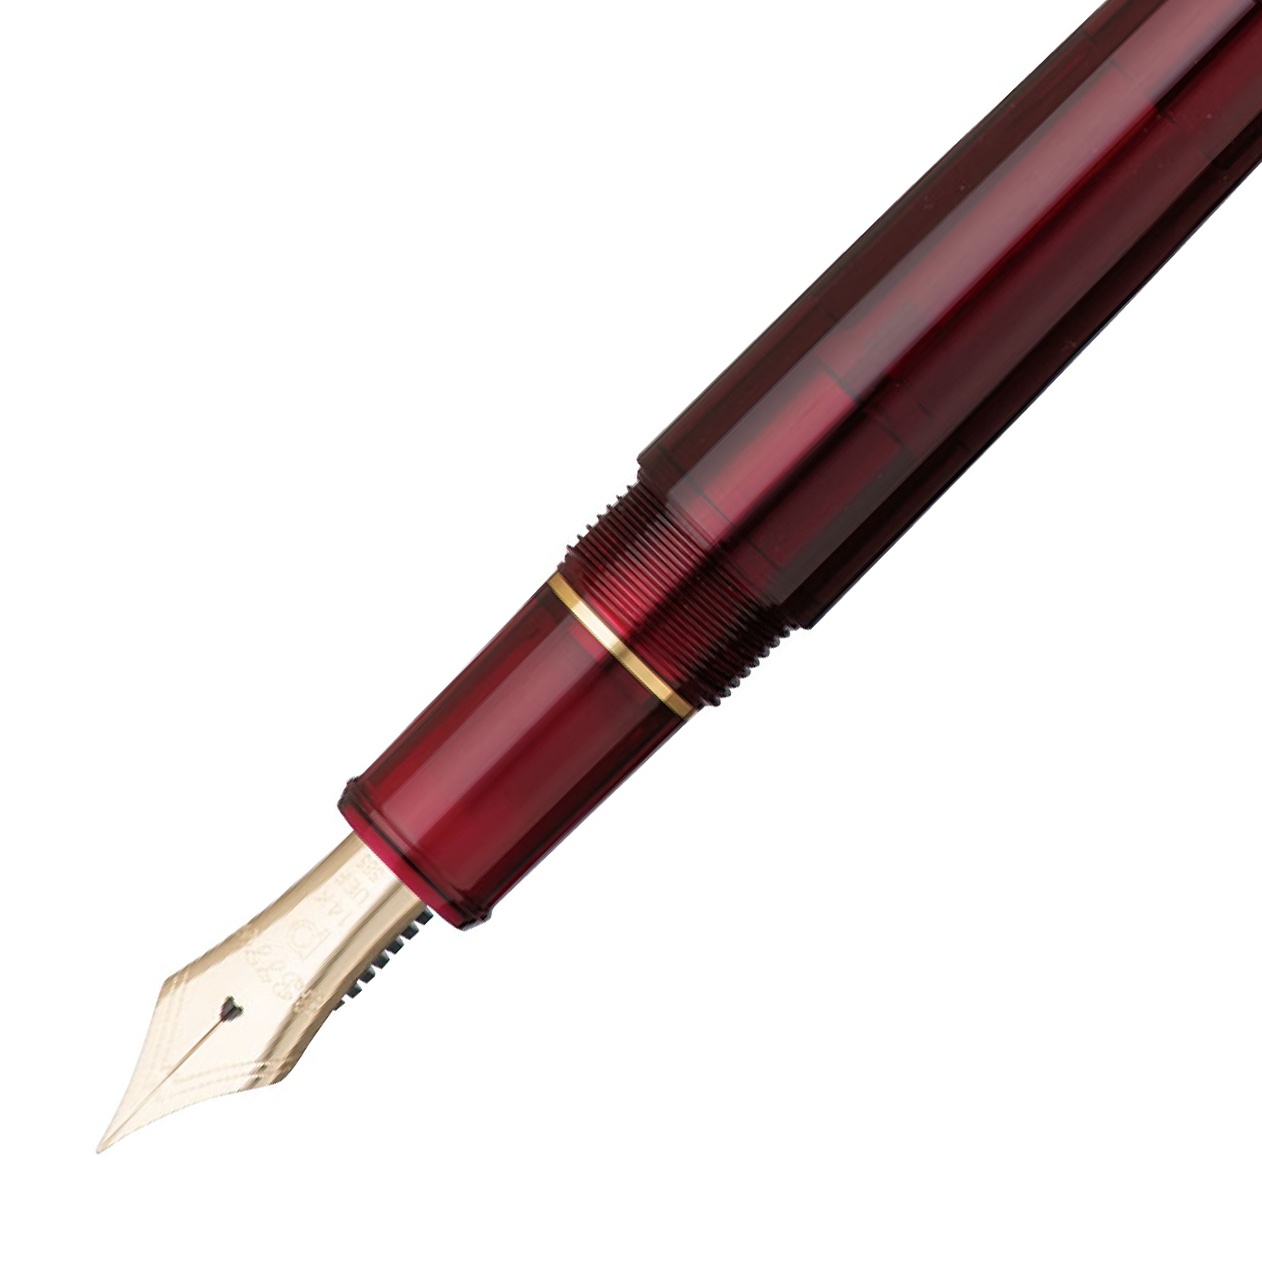 Century Gold Trim Fountain Pen Bourgogne in the group Pens / Fine Writing / Gift Pens at Pen Store (109838_r)